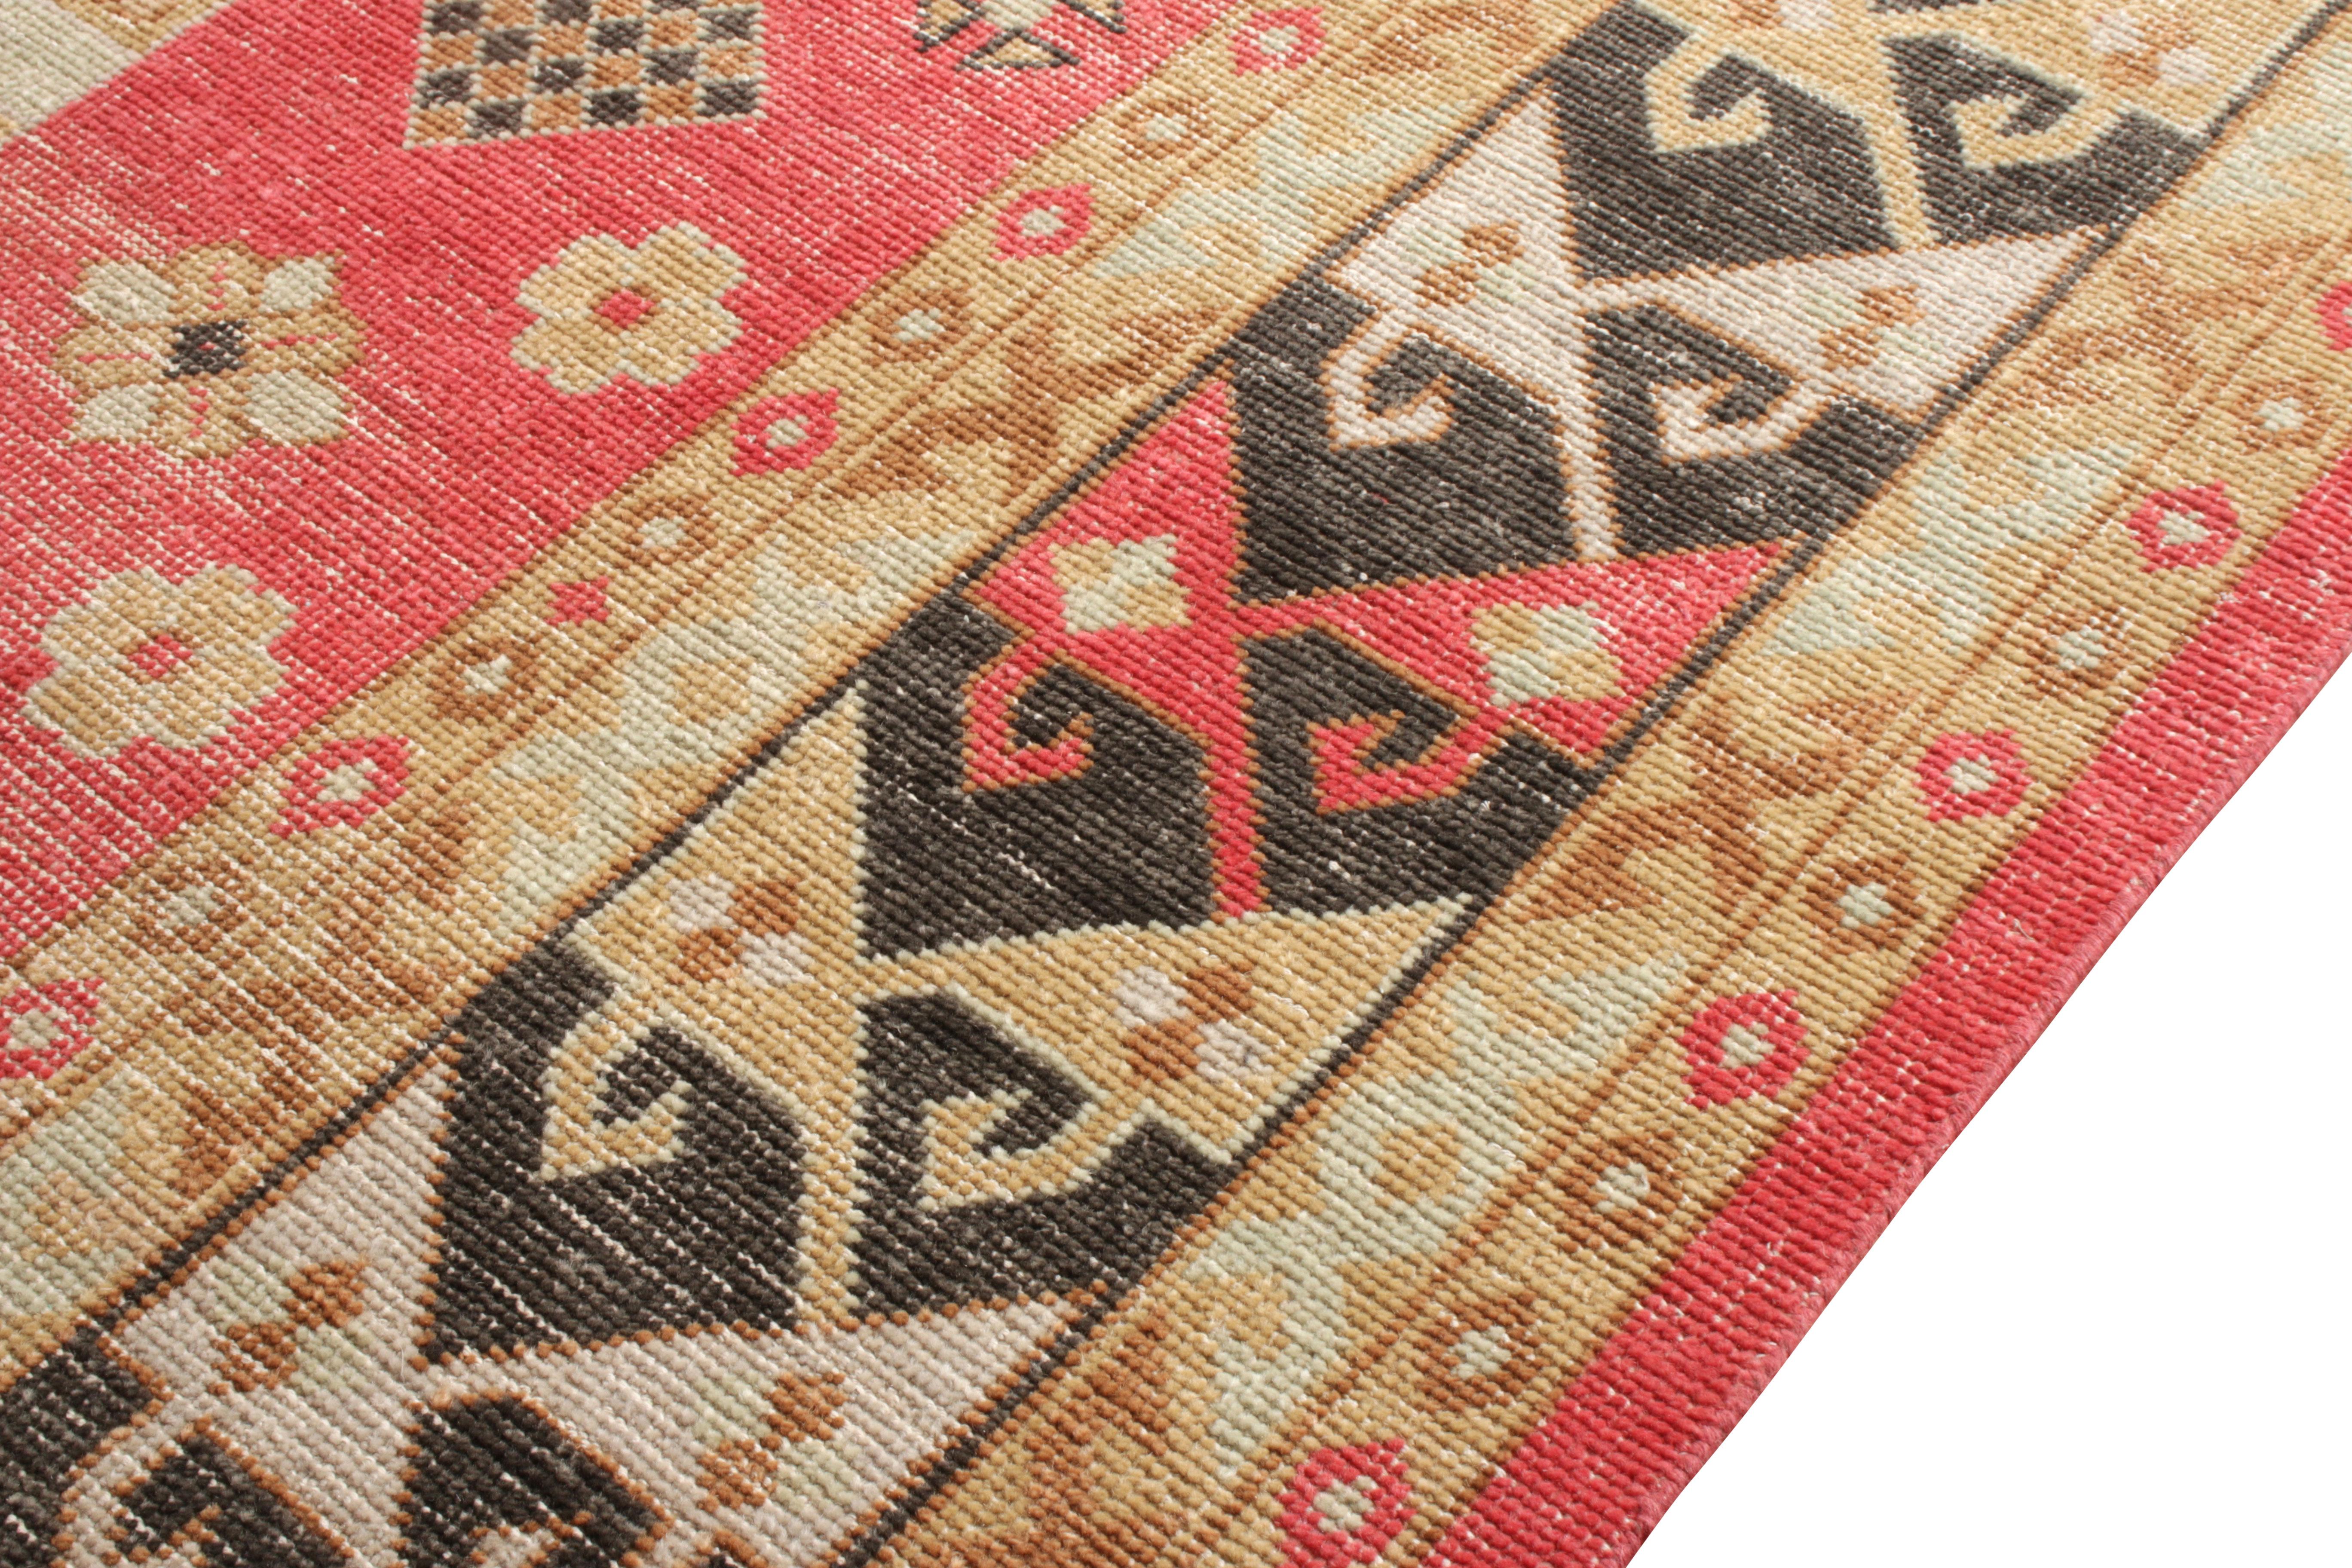 Indian Rug & Kilim’s Distressed Style Rug in Red and Beige-Brown Geometric Pattern For Sale